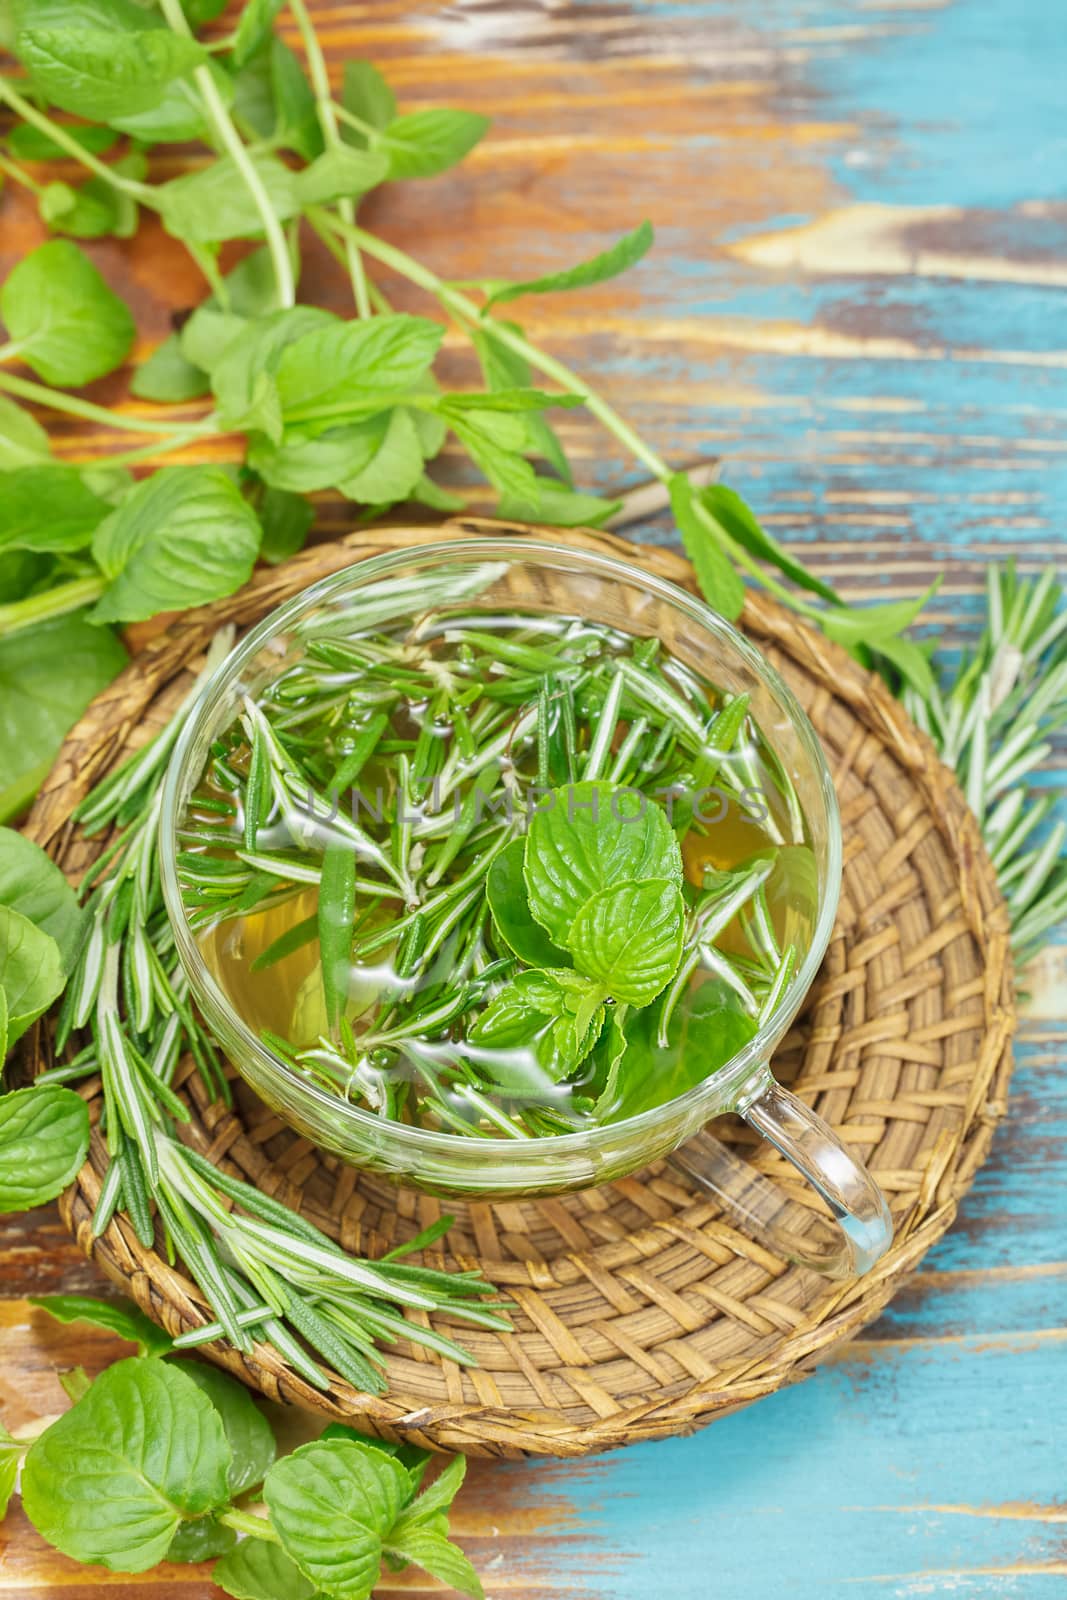 Rosemary Mint Tea with fresh rosemary and mint leaves. Macro, selective focus